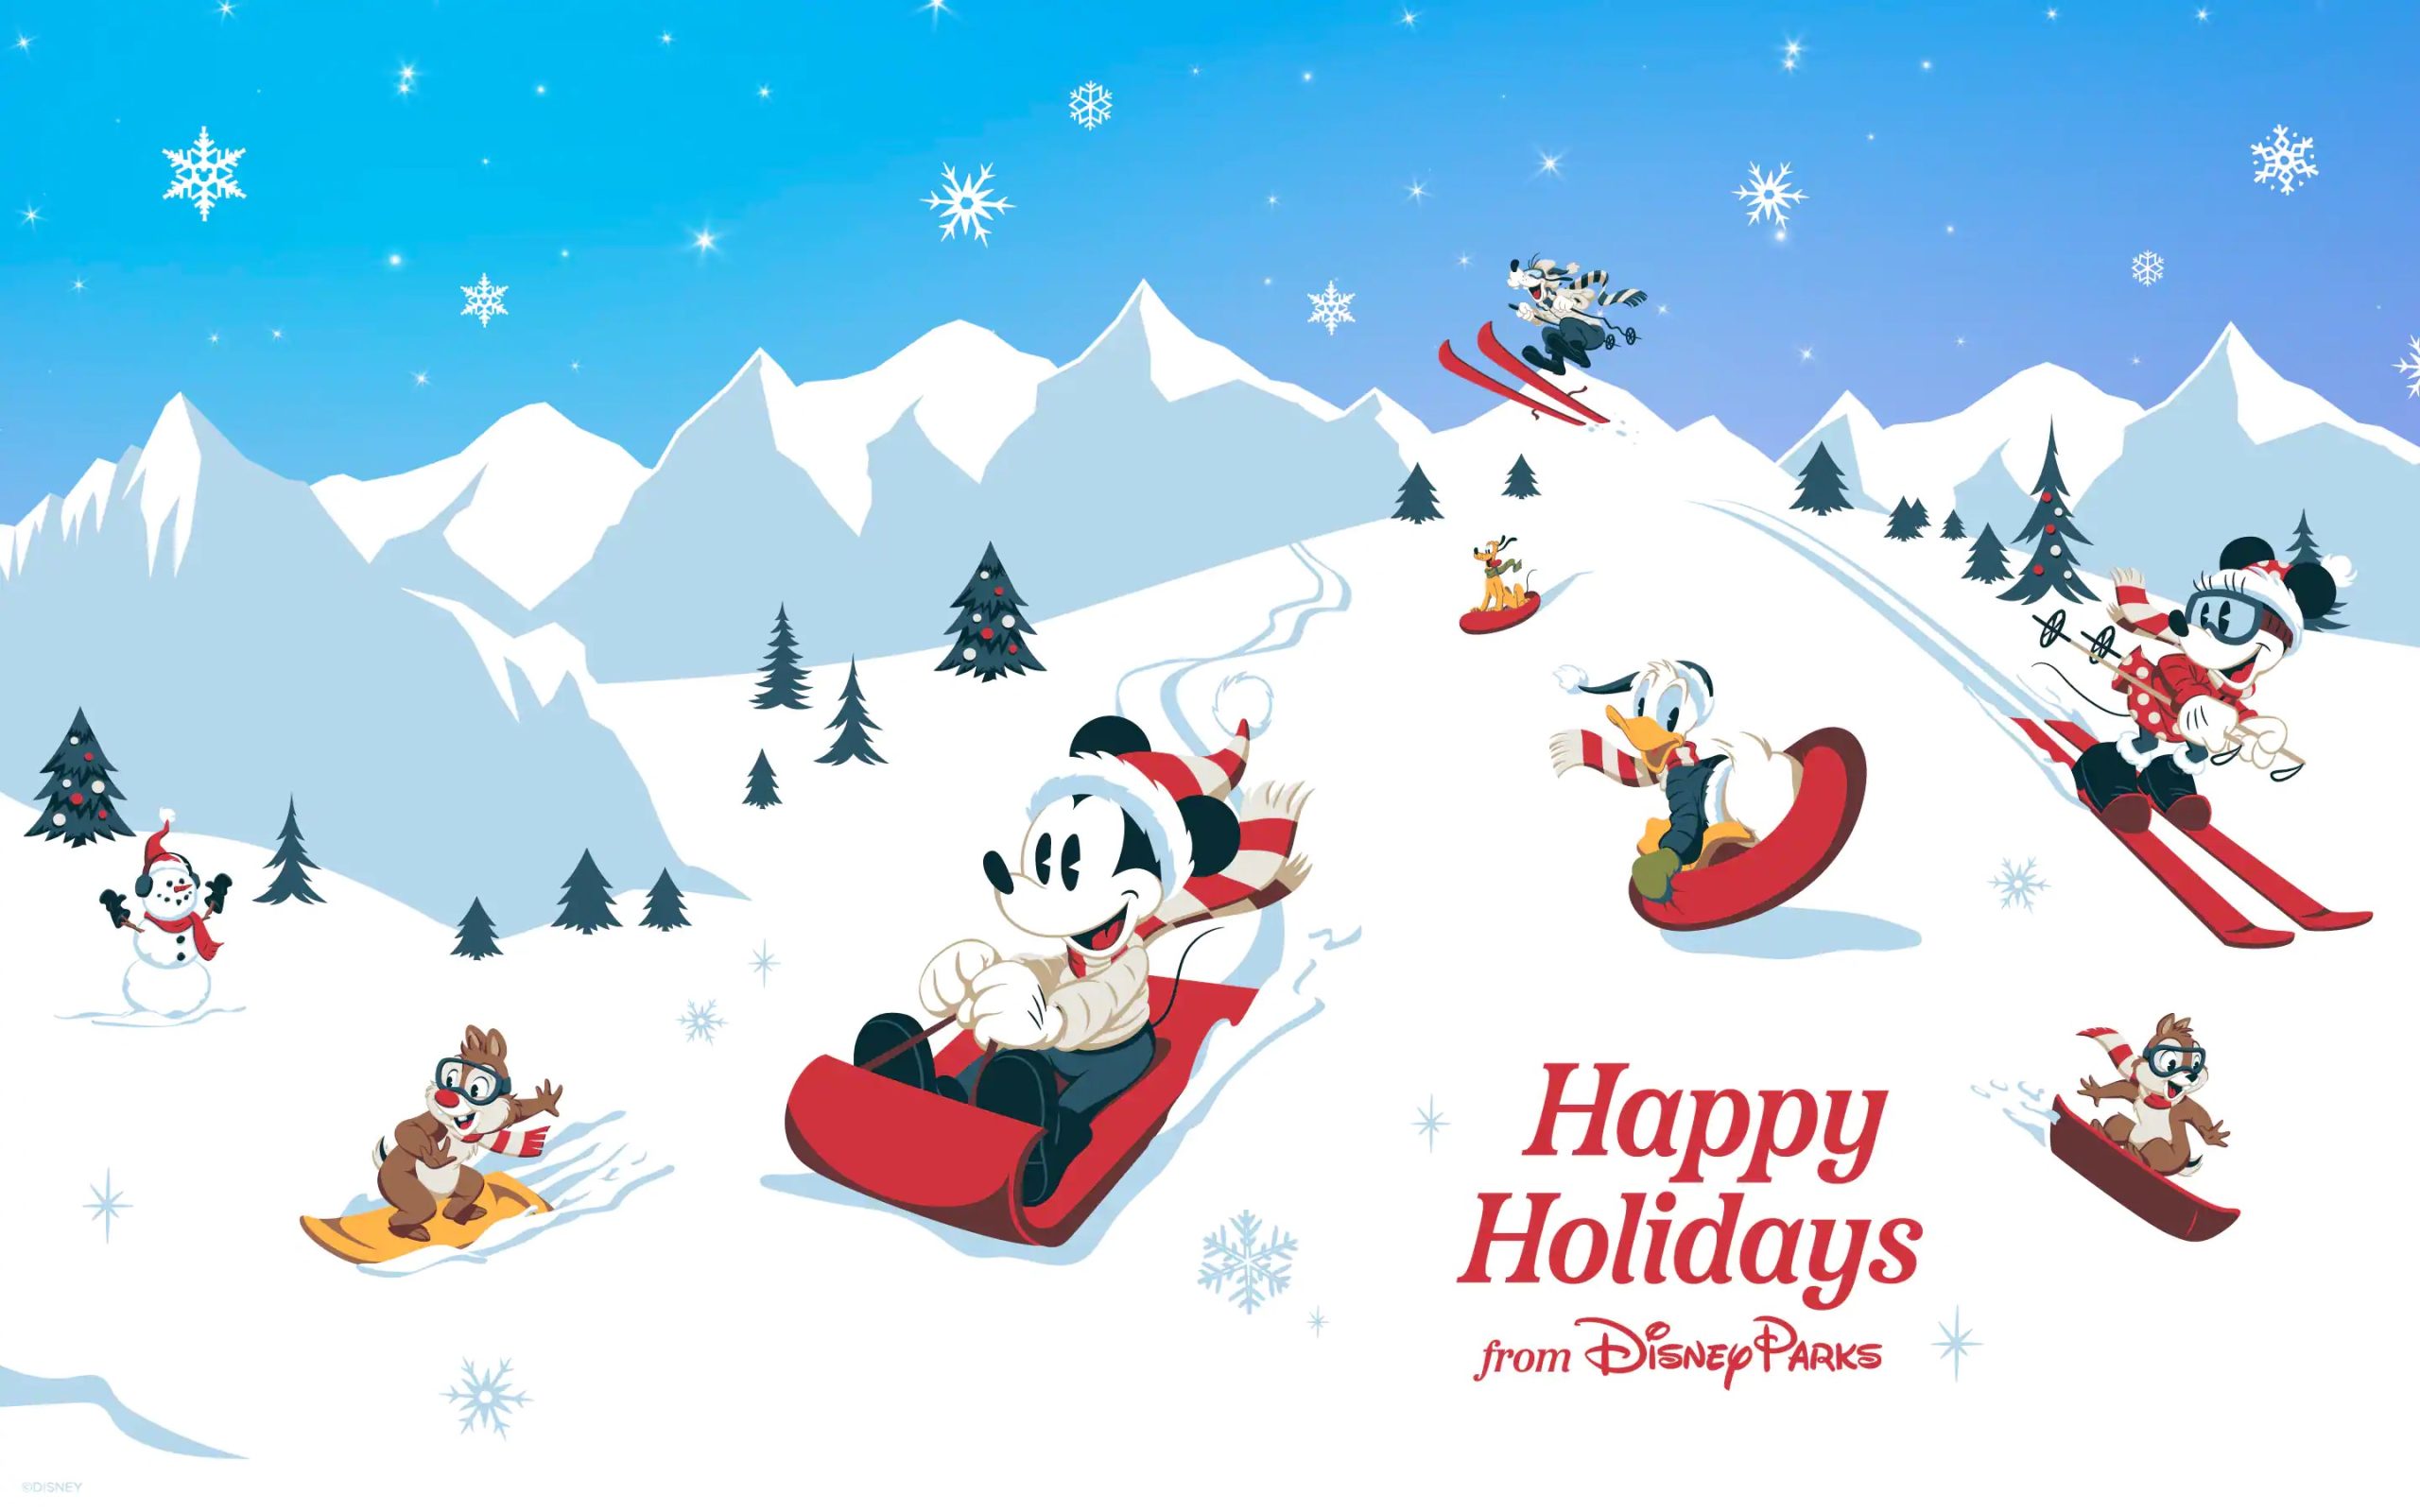 HD wallpaper Happy Christmas Holidays Mickey And Minnie Mouse Donald And  Daisy Duck Goofy Pluto And Other Disney Hd Wallpapers 19201080  Wallpaper  Flare